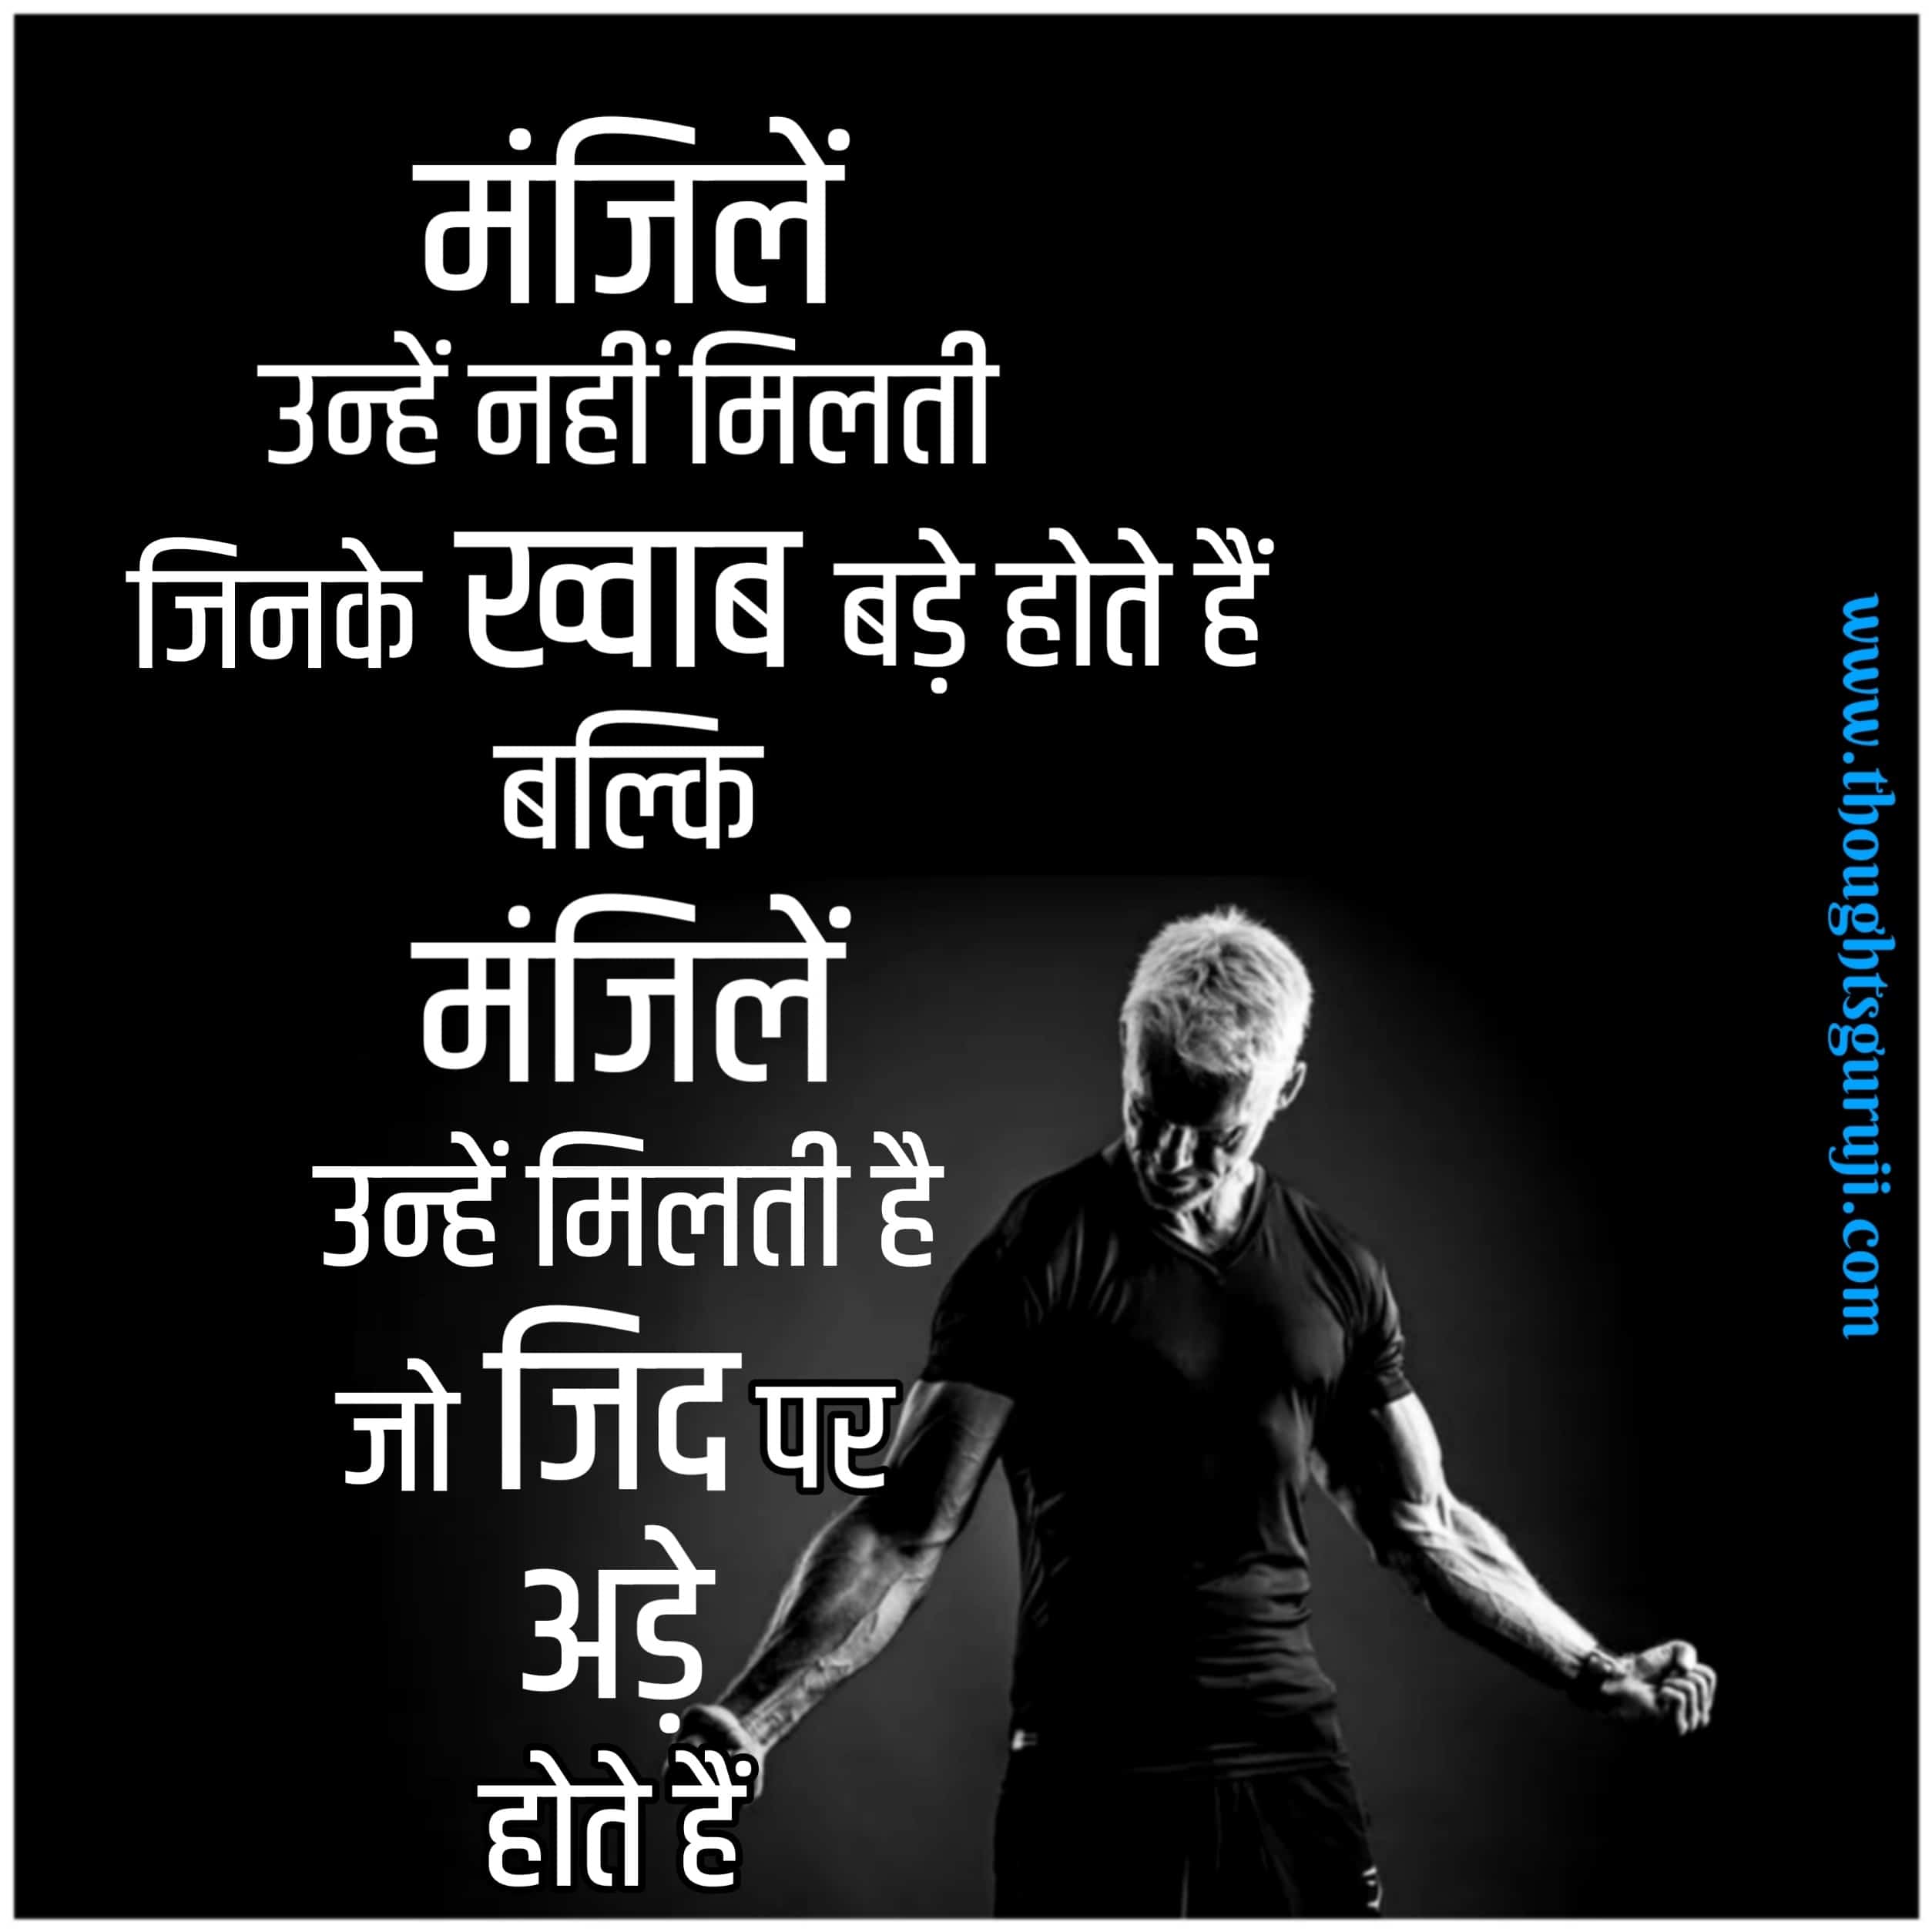 Motivational Quotes In Hindi For Students à¤® à¤ à¤µ à¤¶à¤¨à¤² à¤ à¤ à¤¸ à¤« à¤° à¤¸ à¤ à¤¡ à¤ à¤¸ Thoughts in hindi for students that will inspire their life | thoughts for students. motivational quotes in hindi for